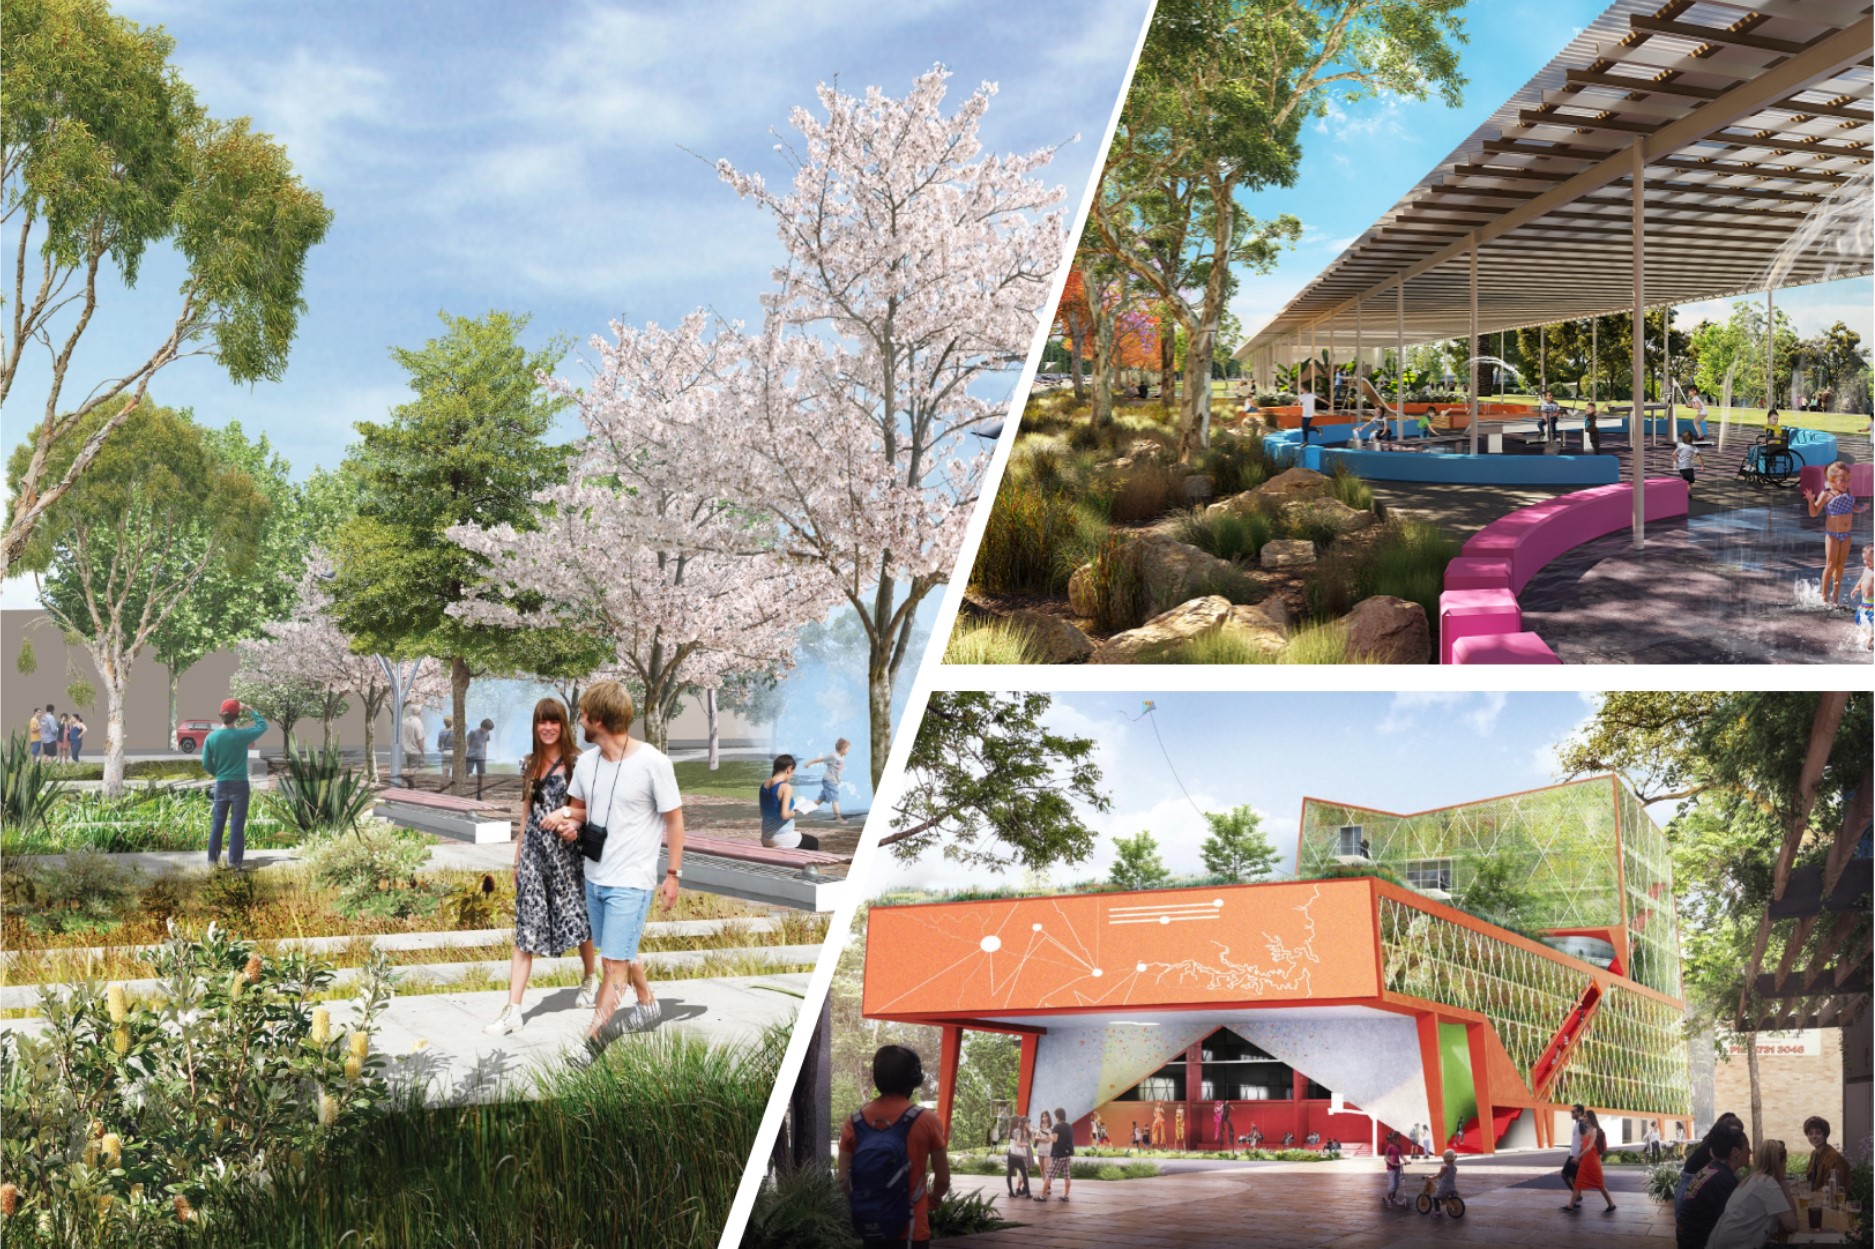 artist impressions showing parks and trees, water playground and a striking red and green building